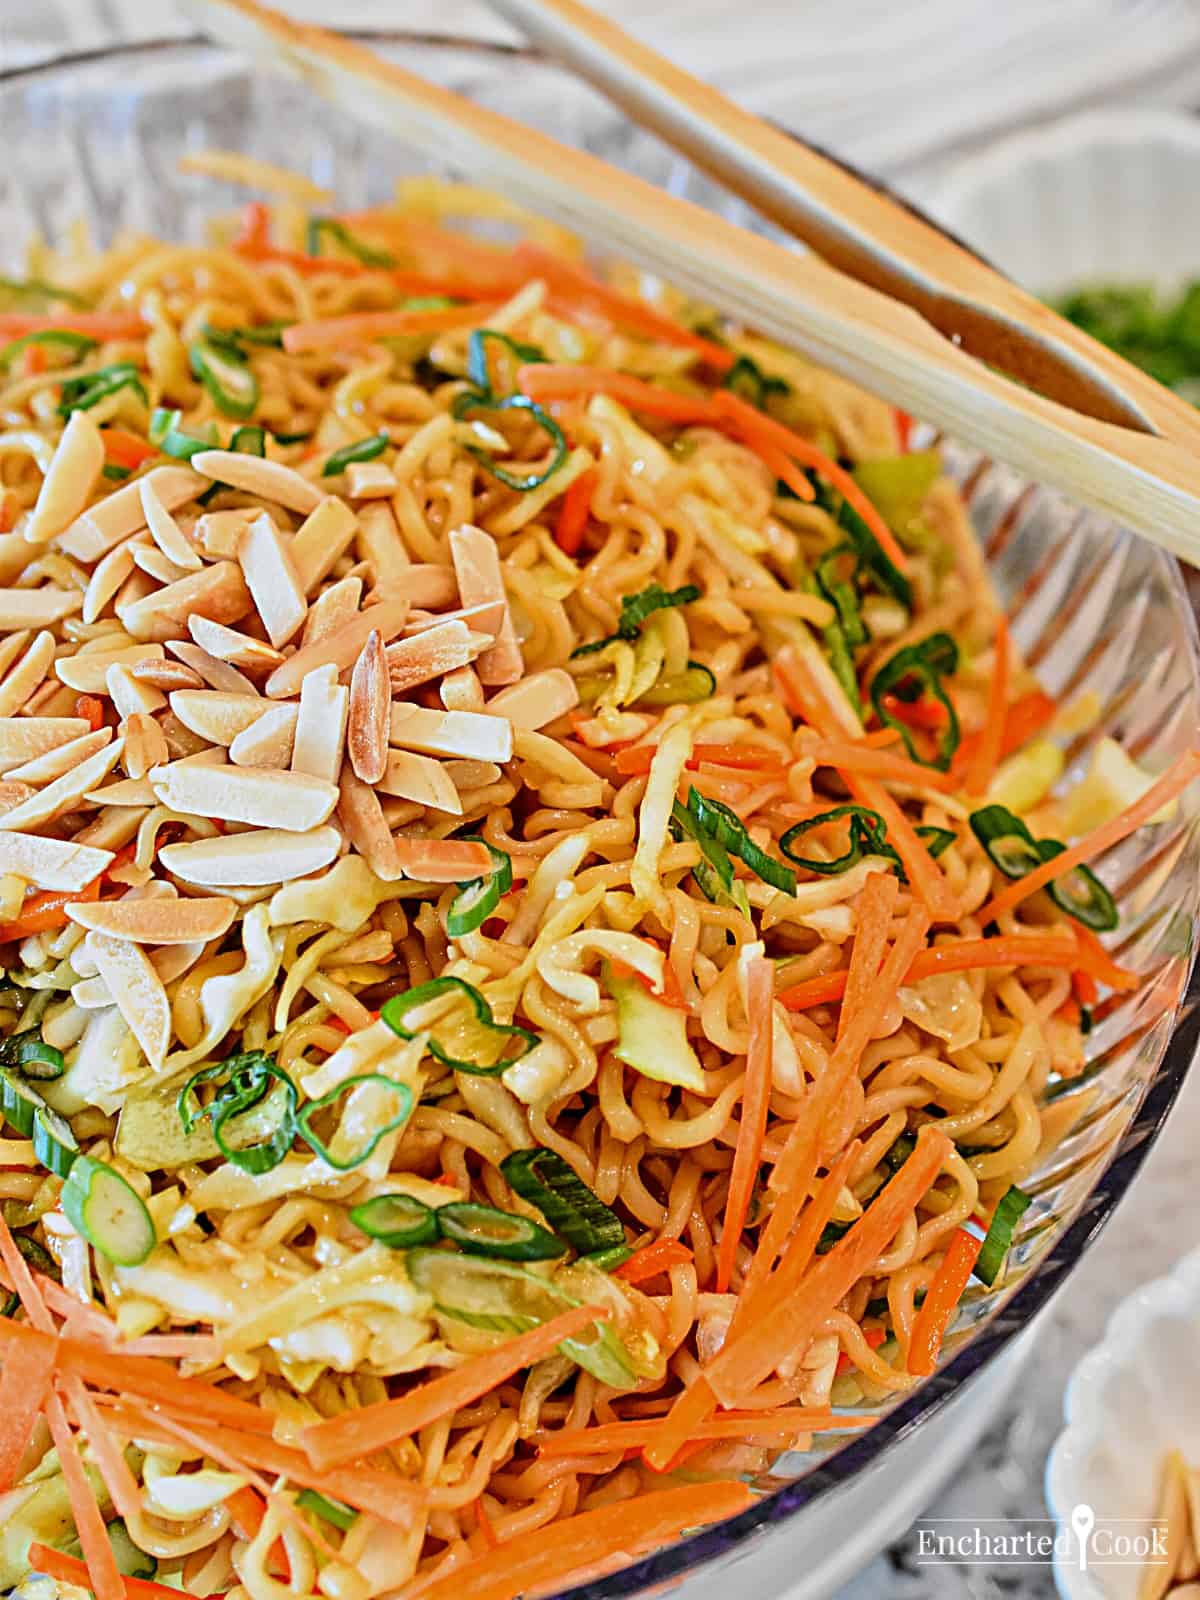 Close up view of the salad in a large clear bowl with chop sticks.